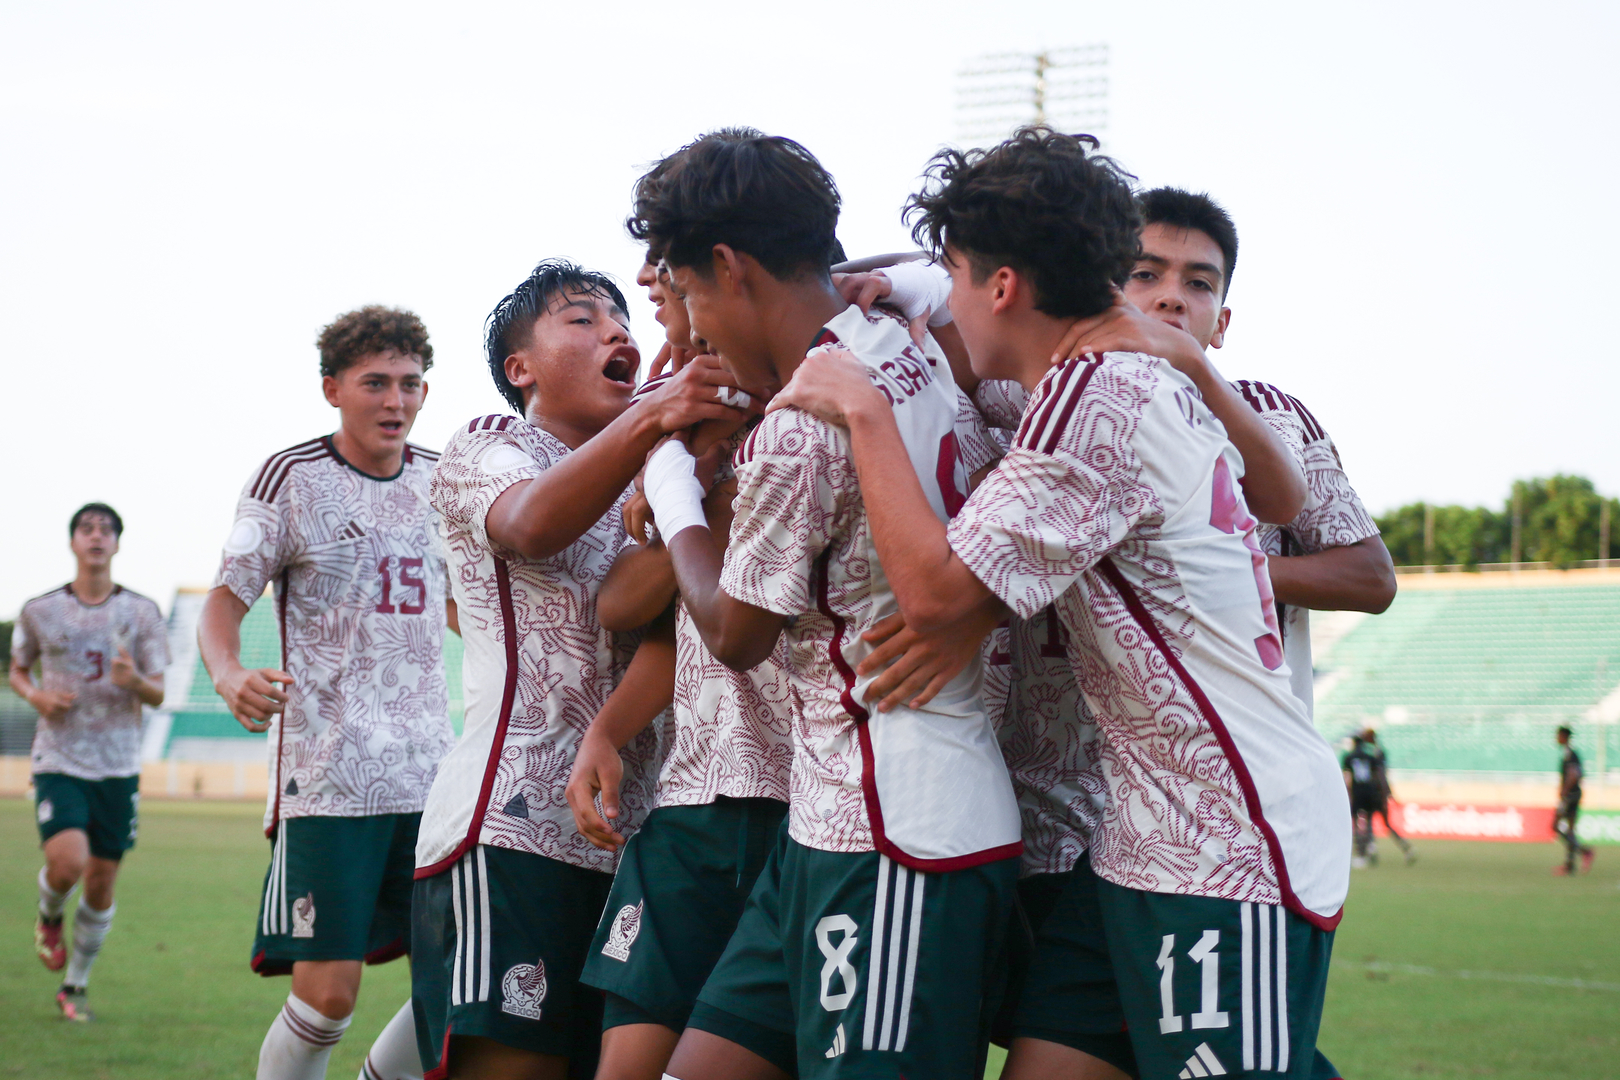 Concacaf announces awards for 2019 Boys Under-15 Championship